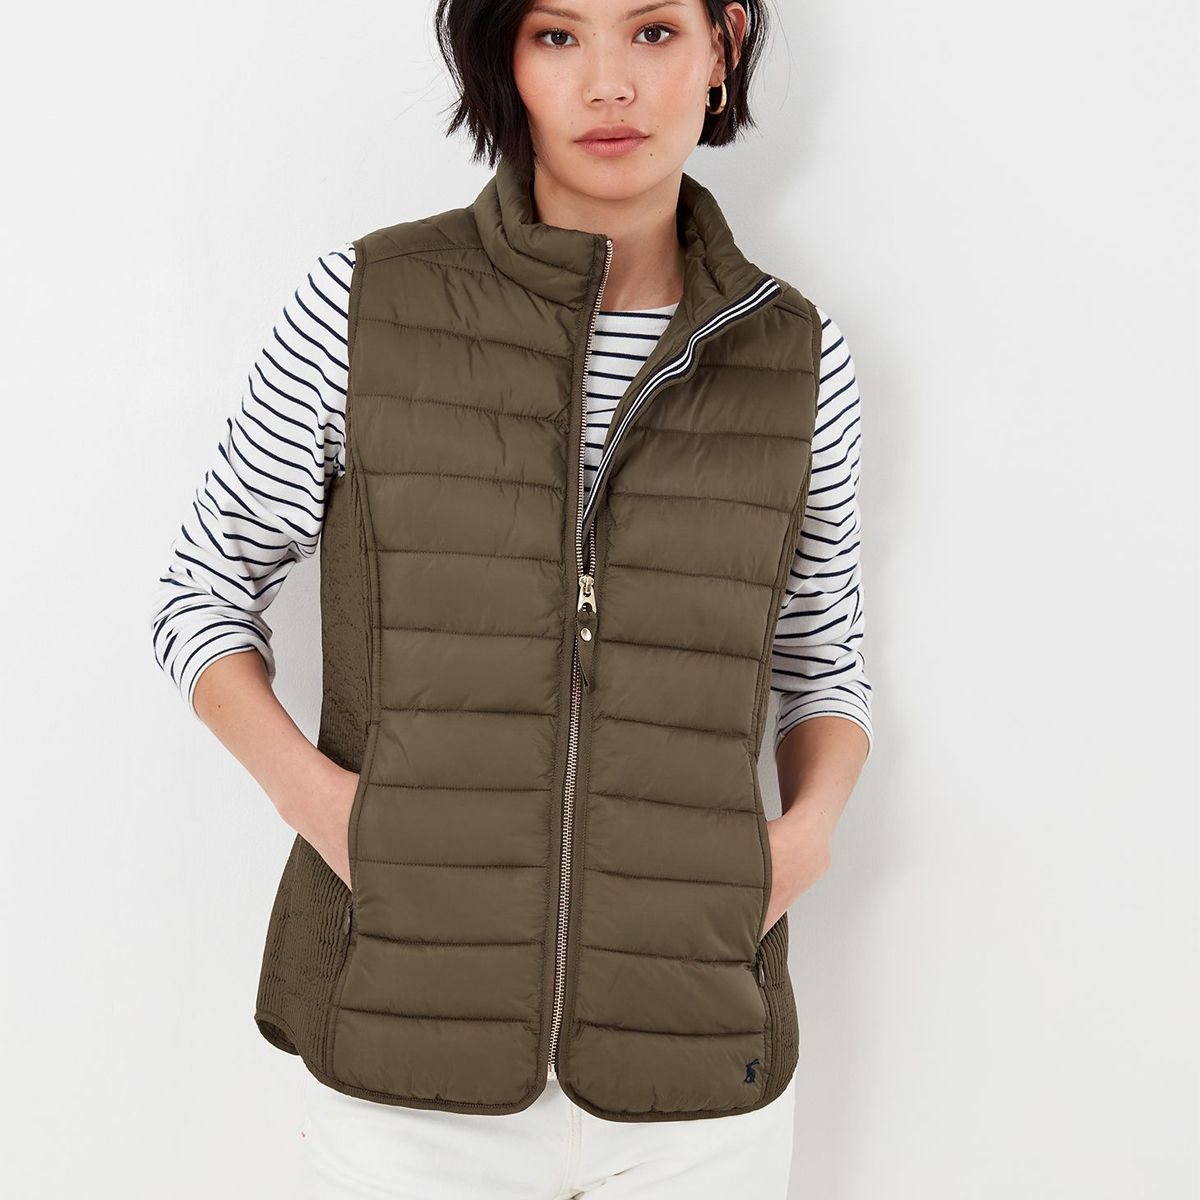 Joules Whitlow Gilet - Robinsons Equestrian